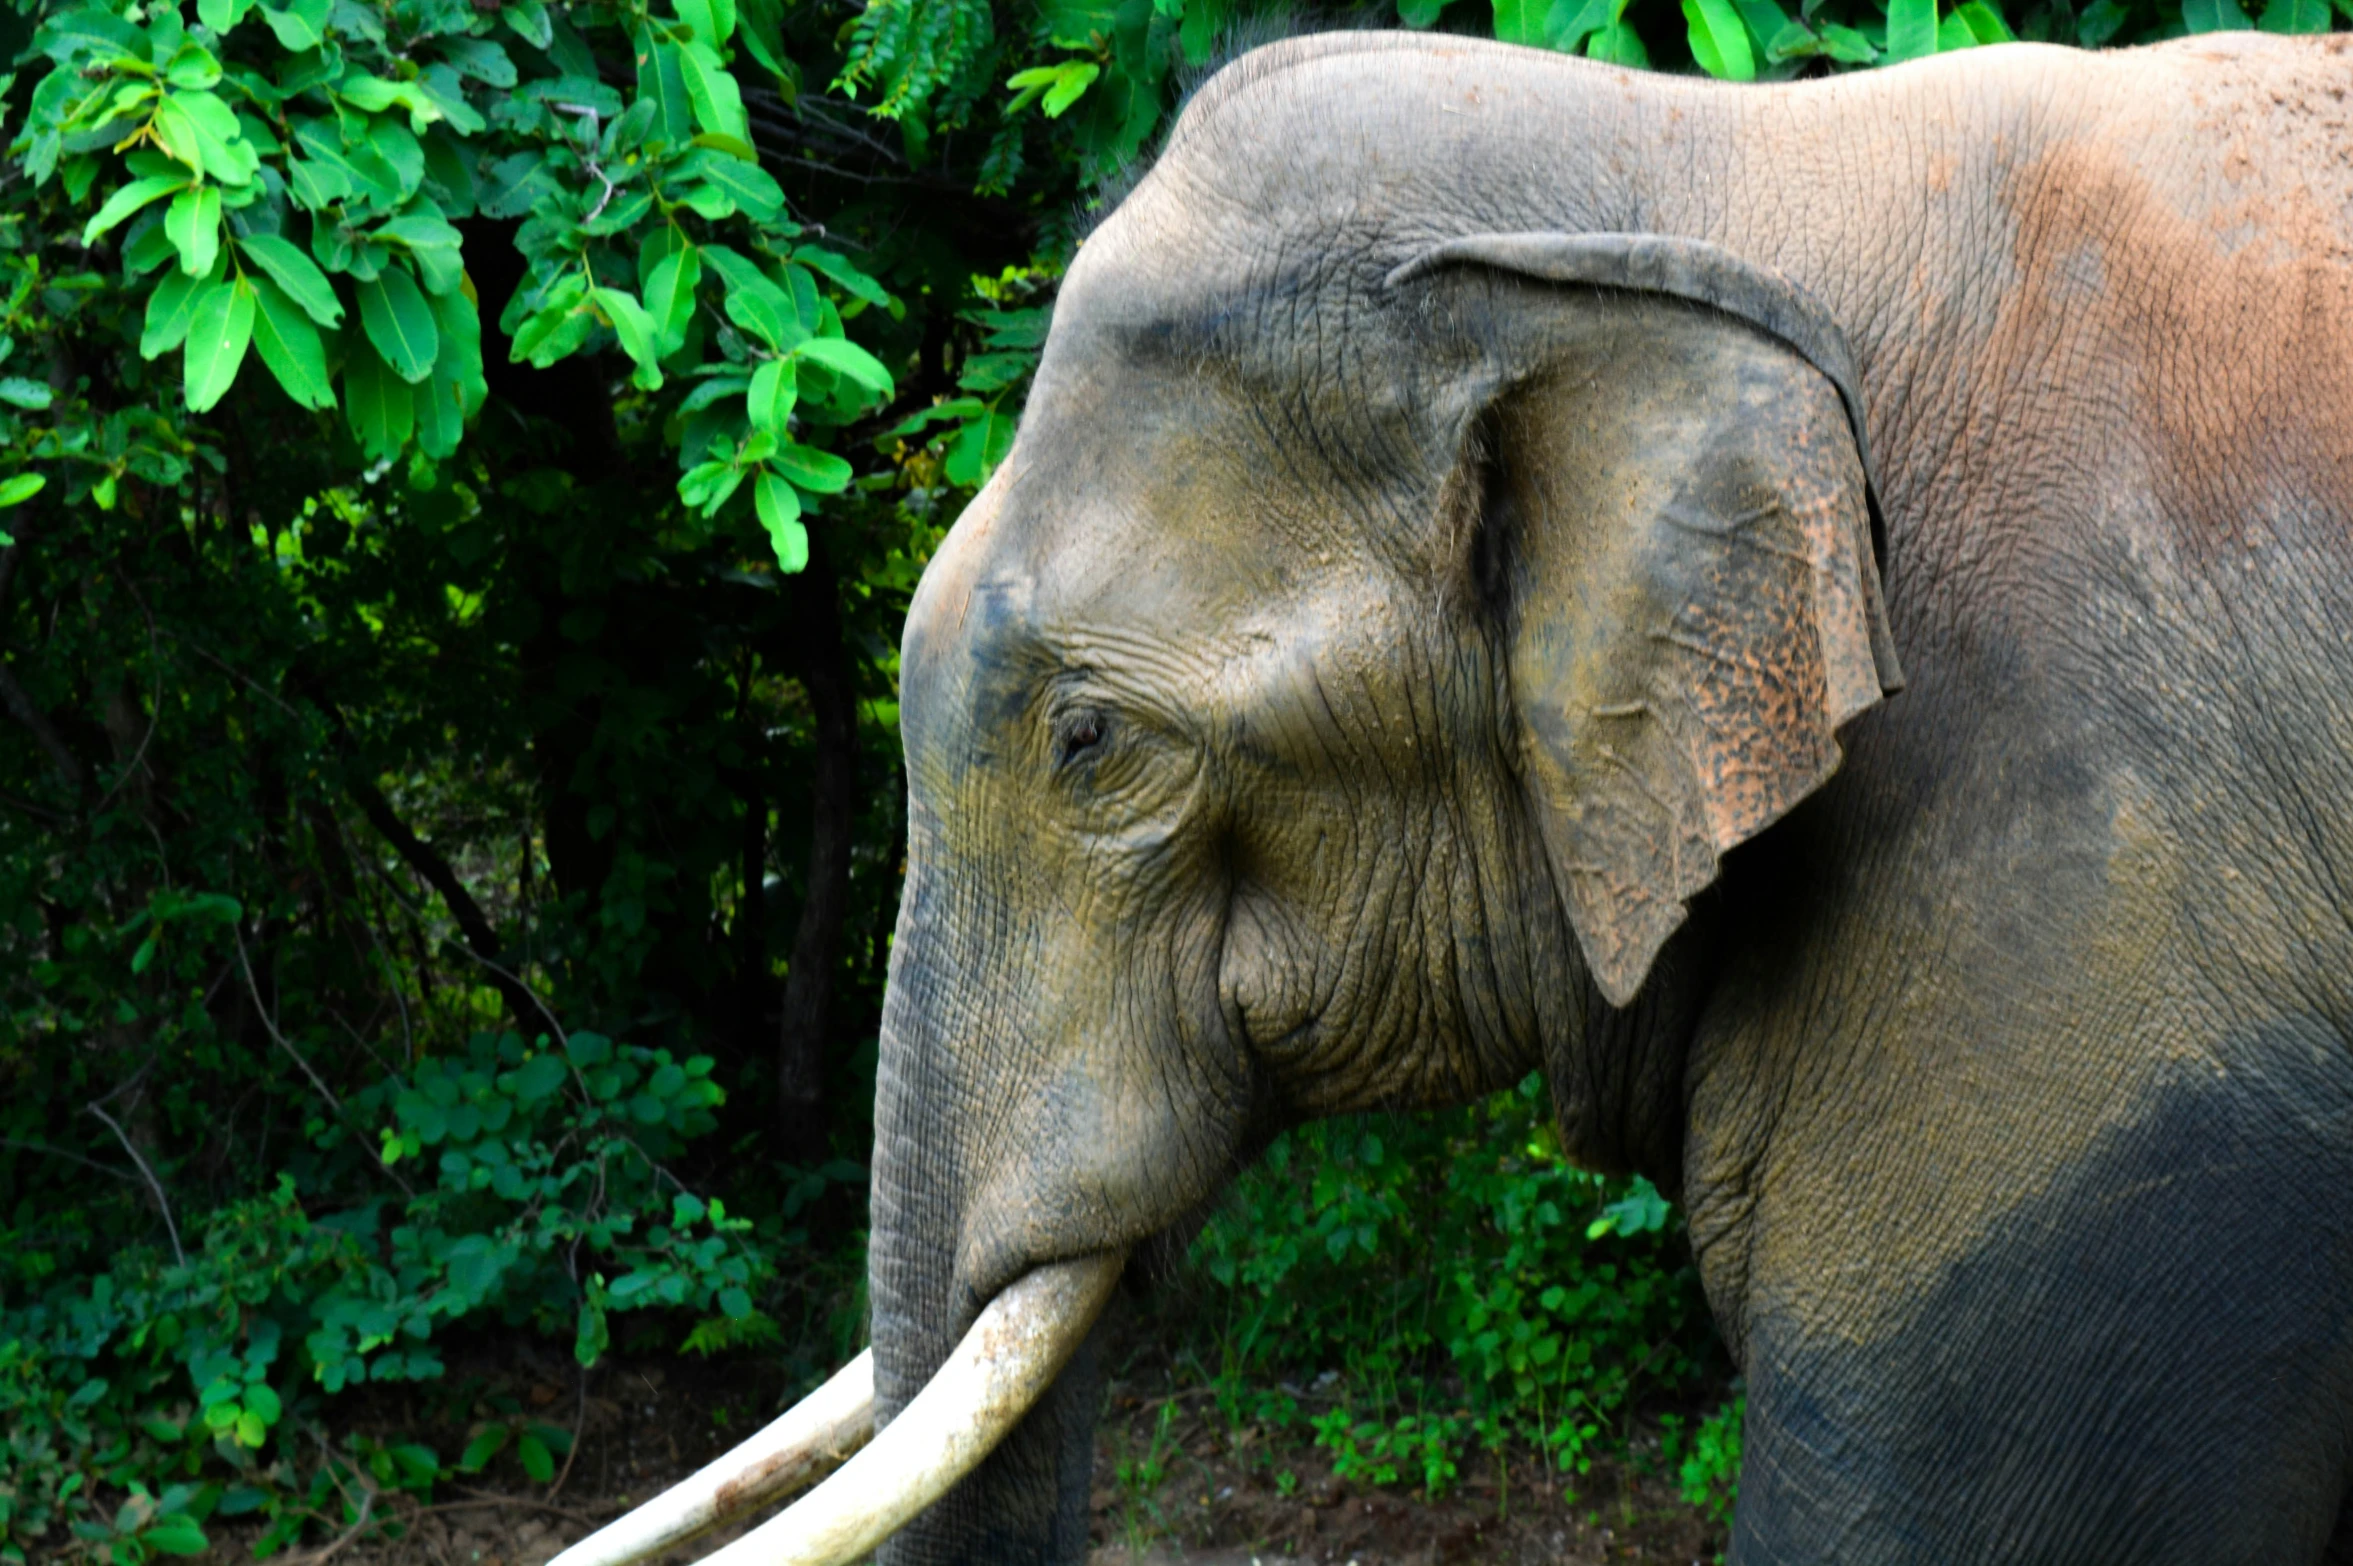 a large elephant stands next to the green trees